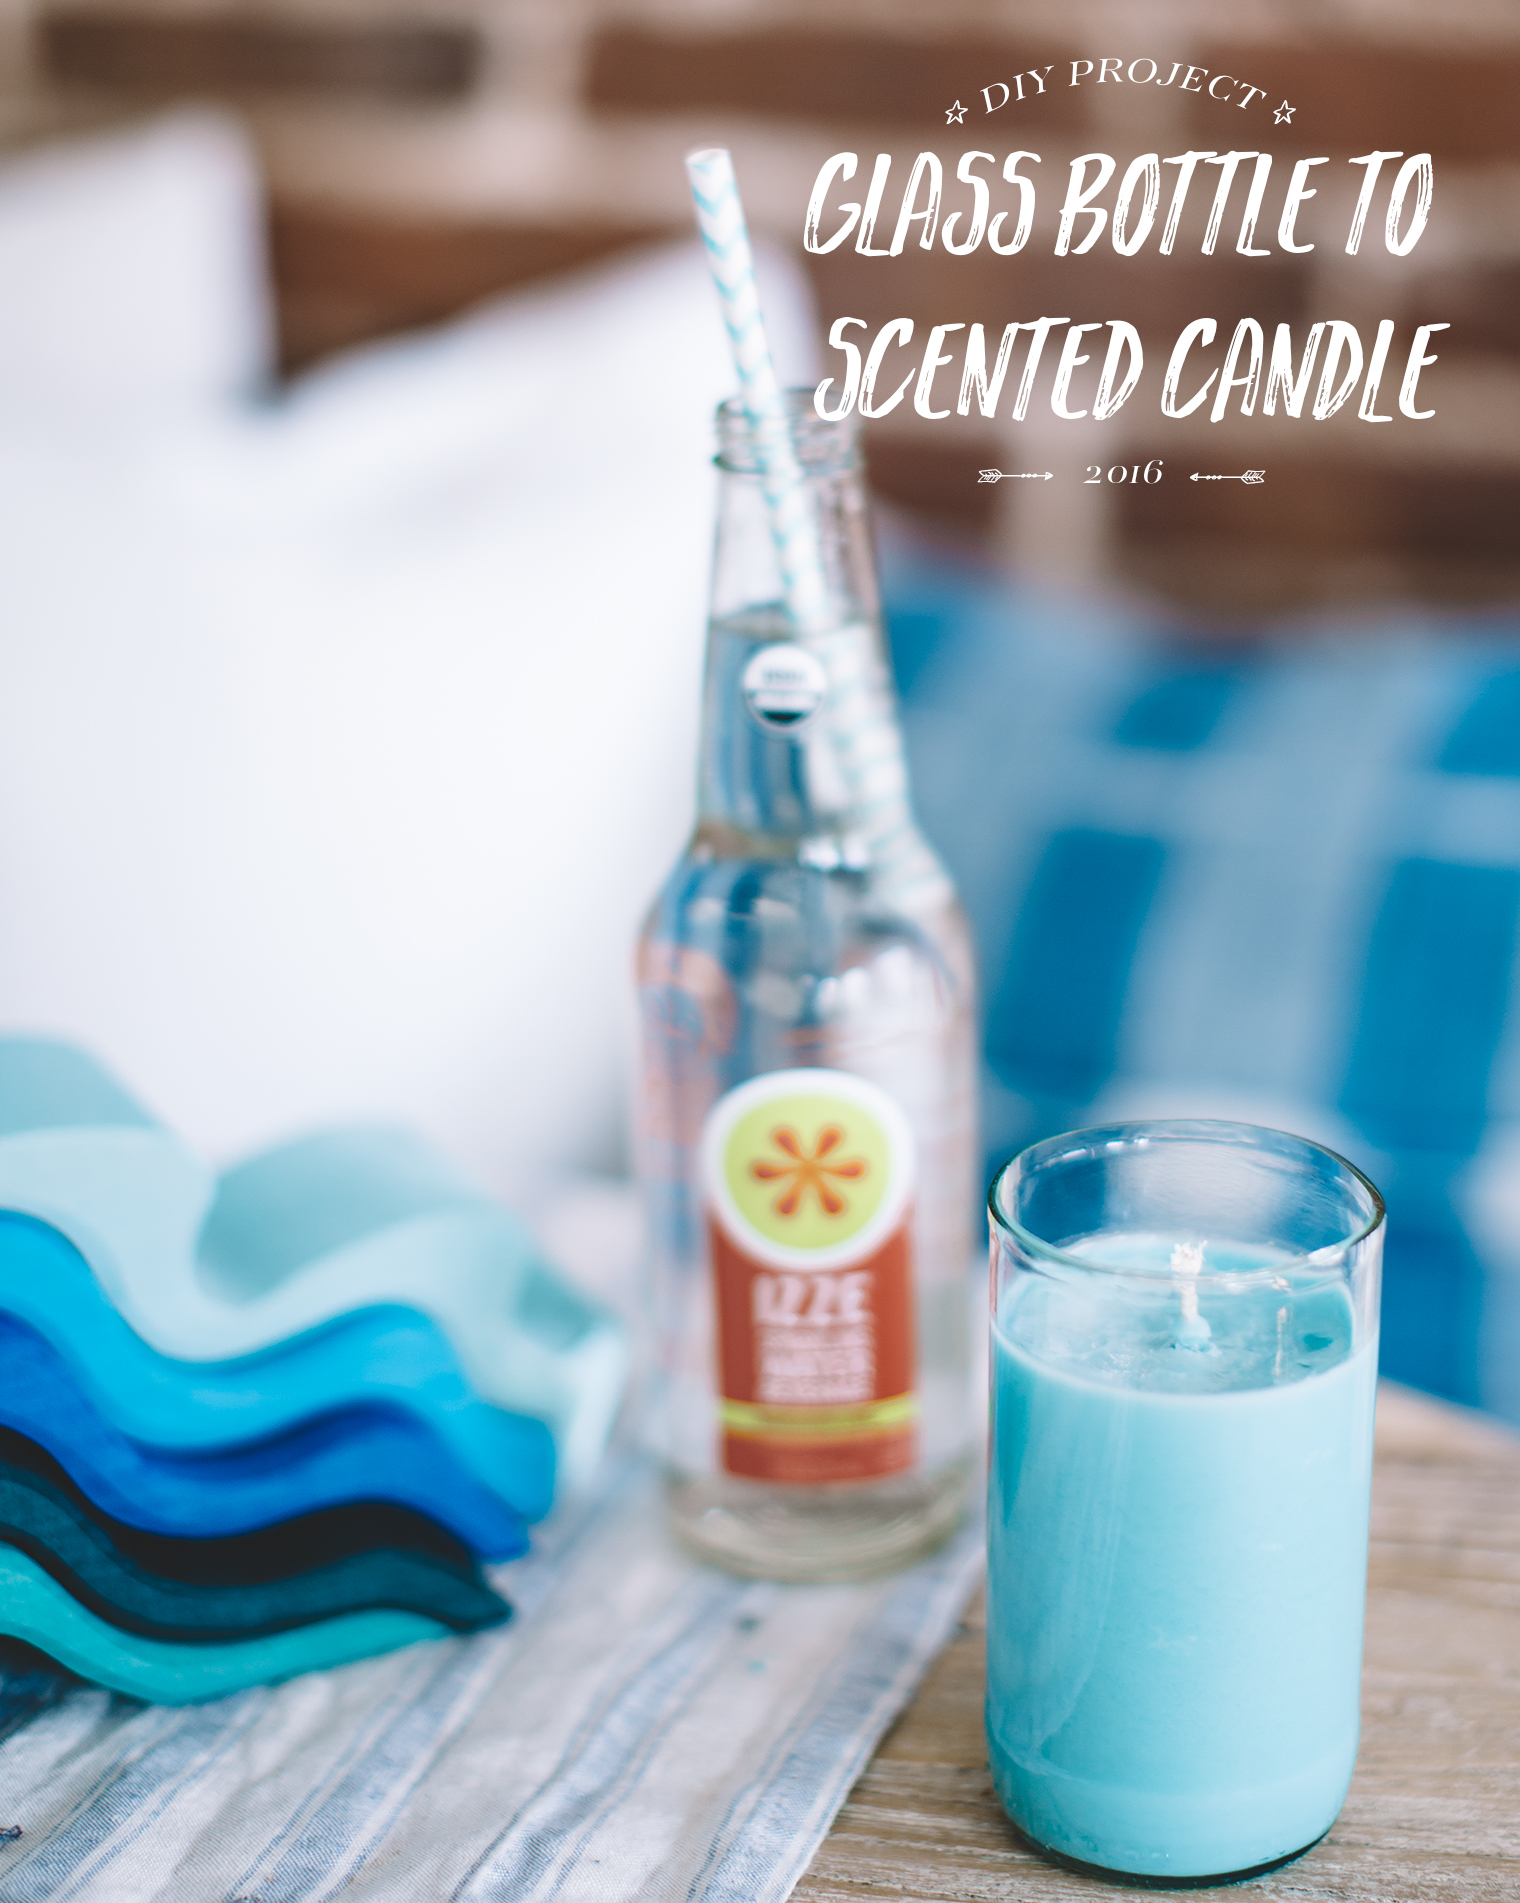 DIY-Glass-Bottle-Homemade-Scented-Candle-Project-How-To-1